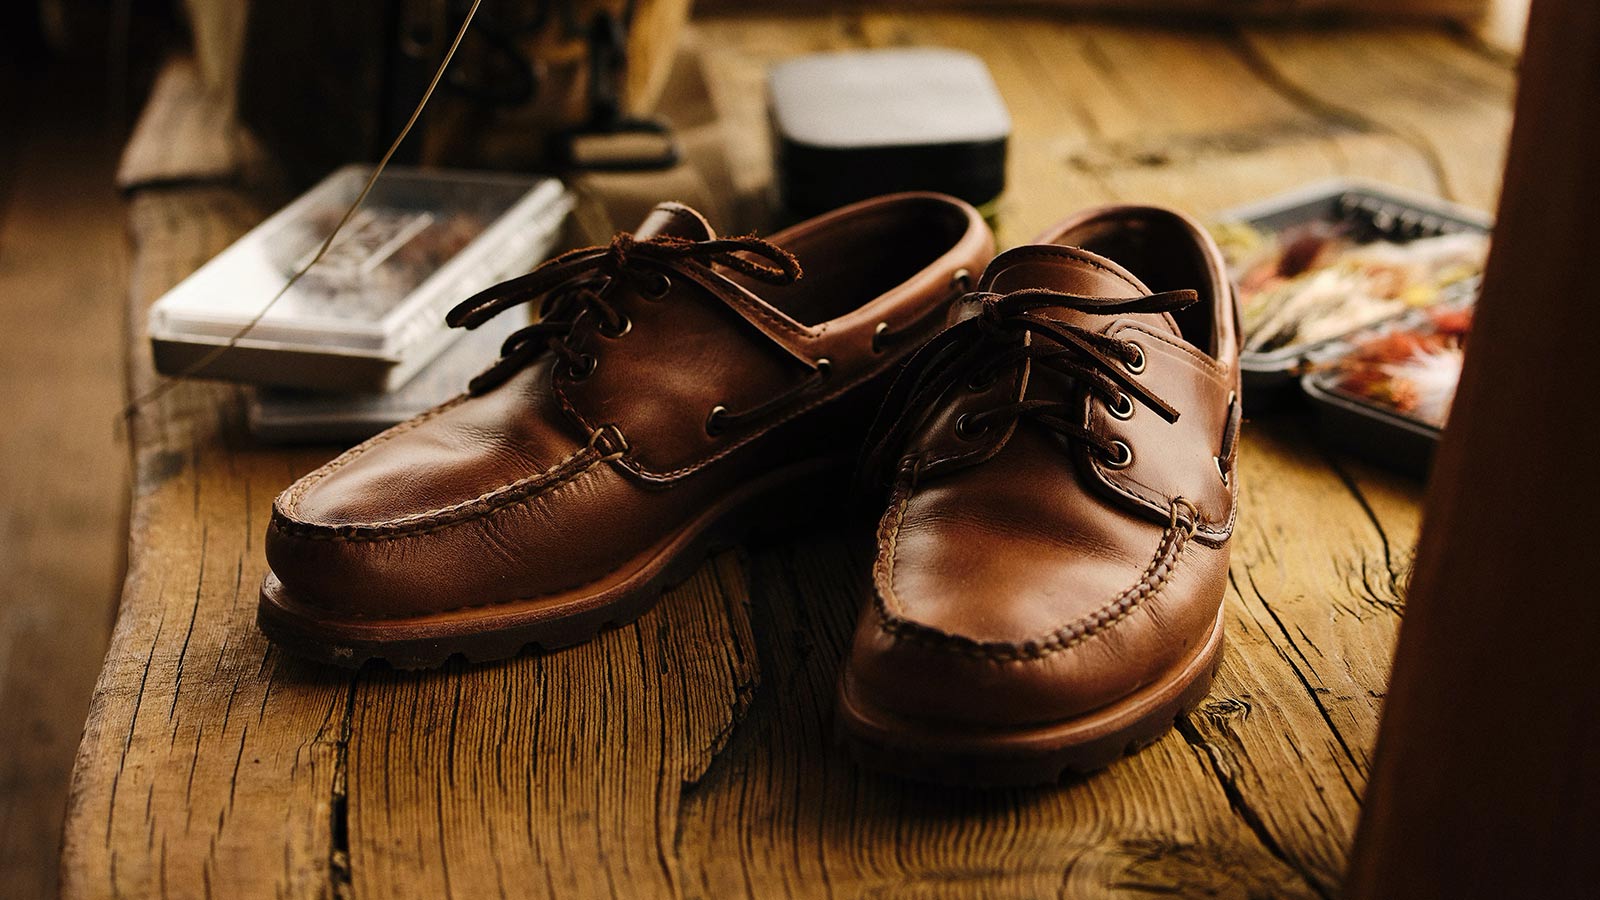 Rancourt & Co. Shoecrafters (@rancourtco) • Instagram photos and videos